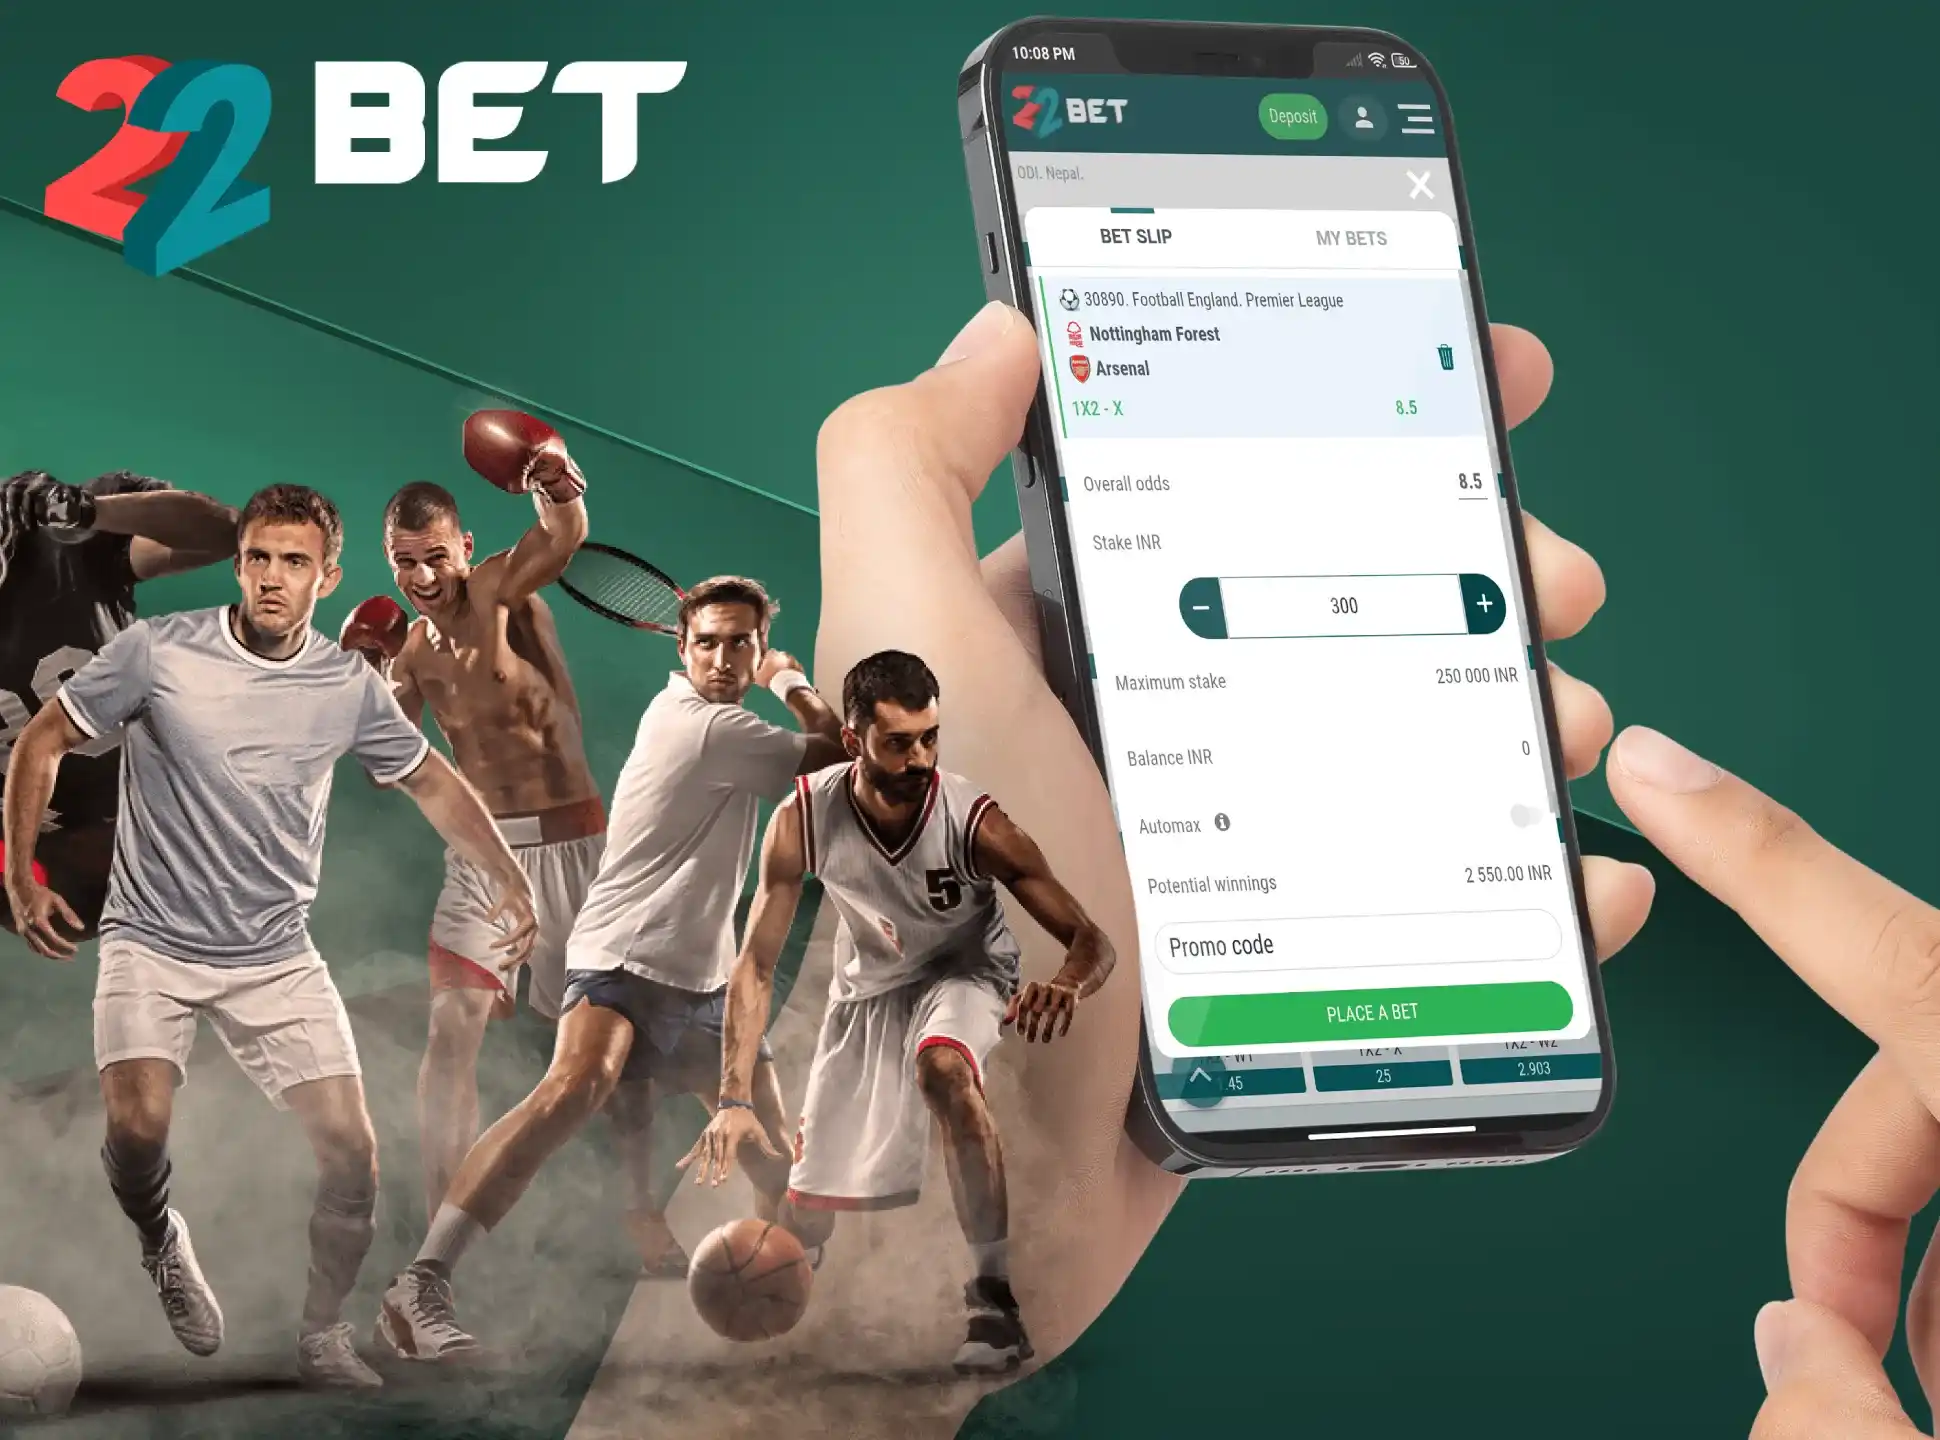 The 22Bet app gives bettors several types of bets to choose from.